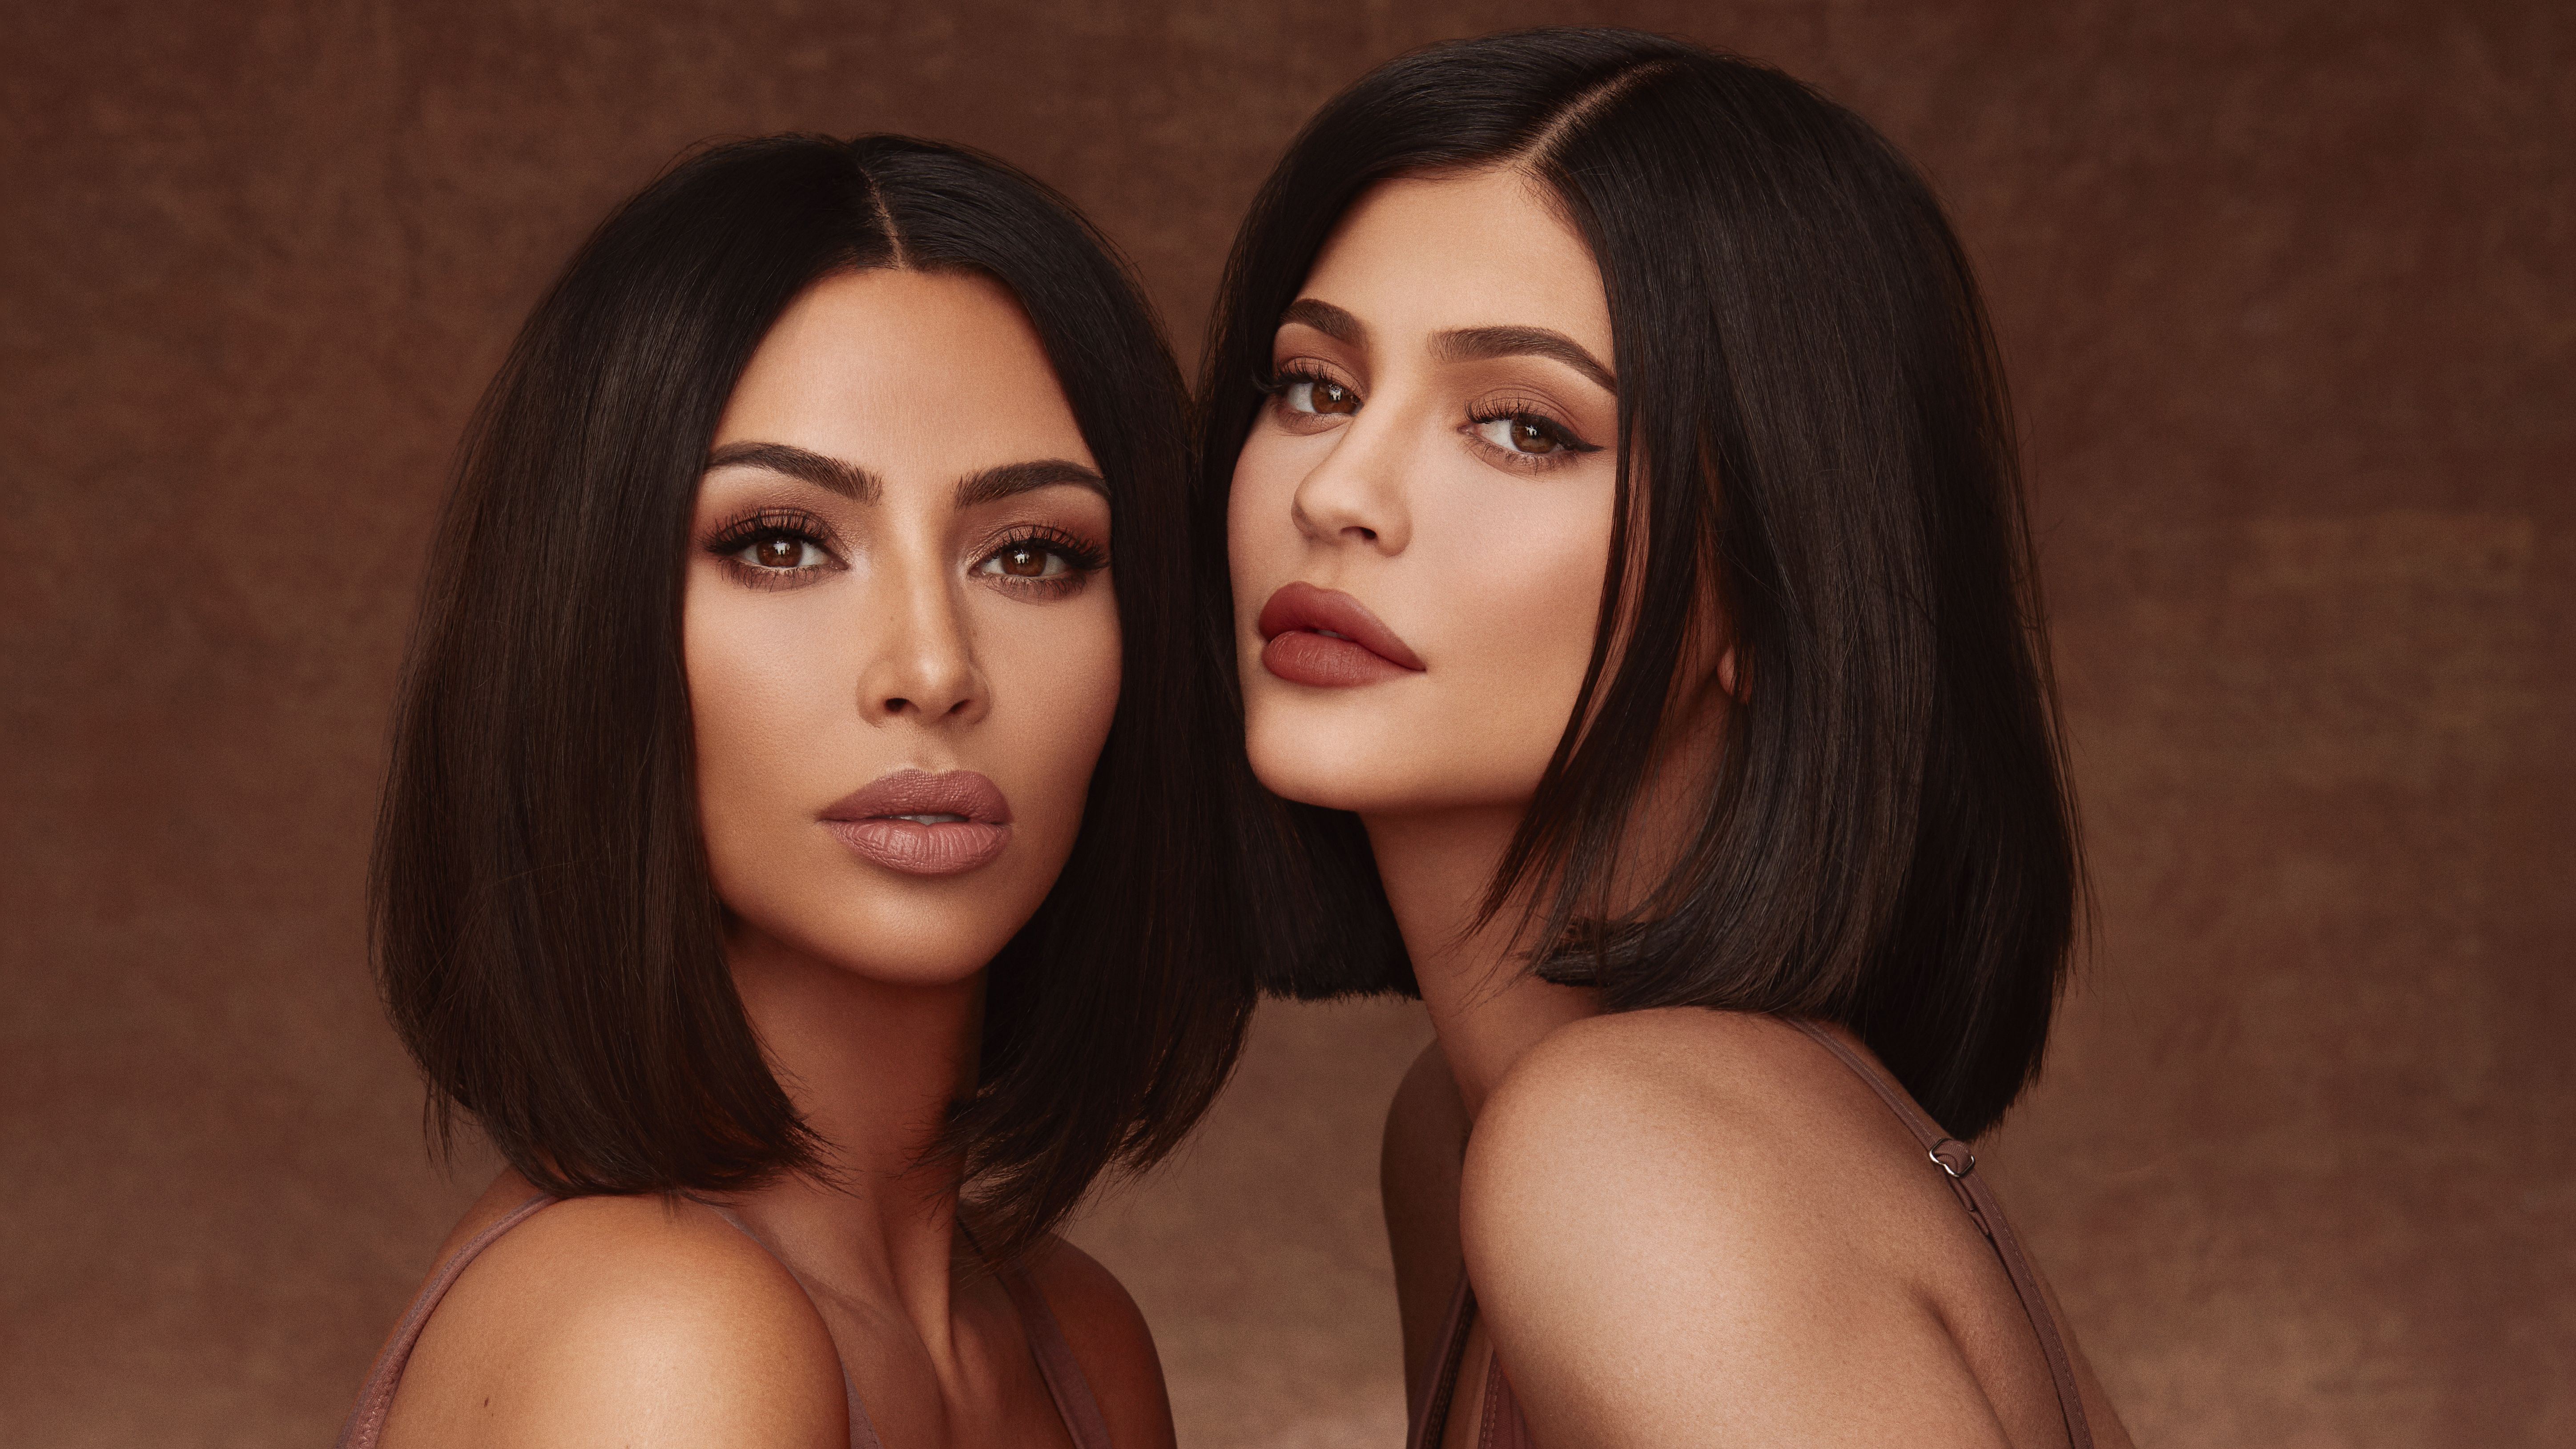 Kim Kardashian And Kylie Jenner 2019 4k, HD Celebrities, 4k Wallpaper, Image, Background, Photo and Picture